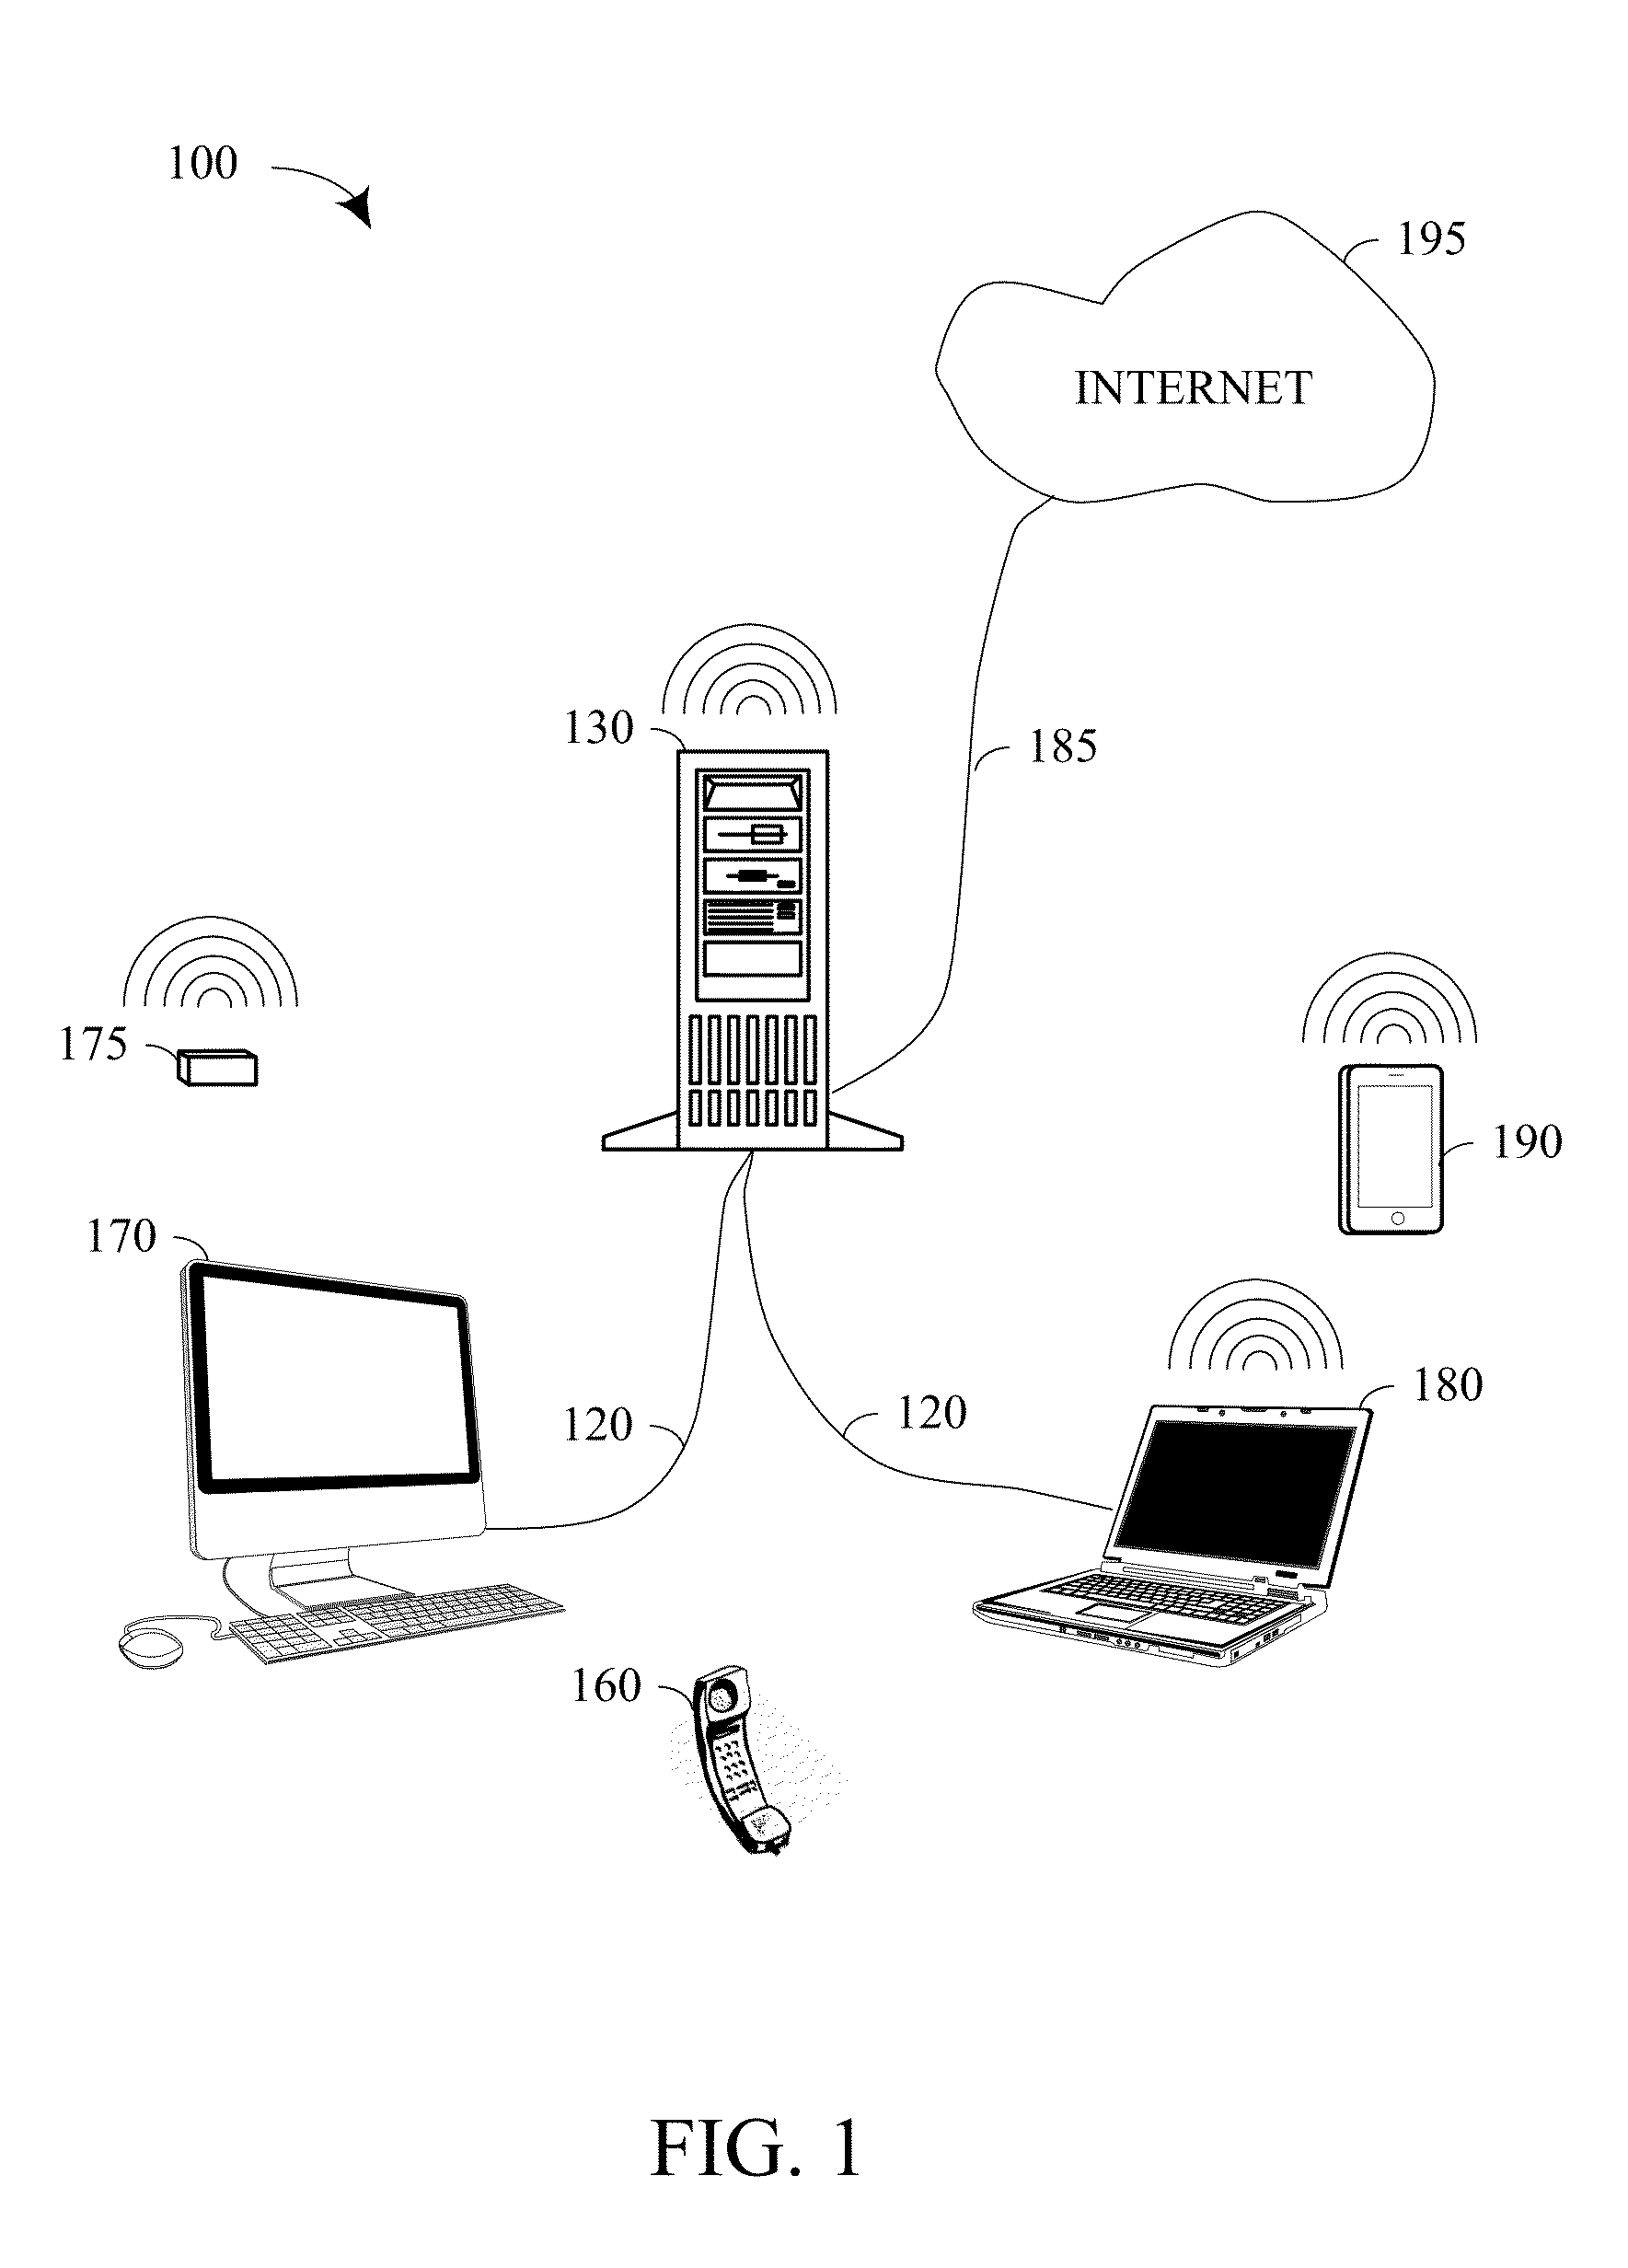 System and method for optimizing mobile device communications